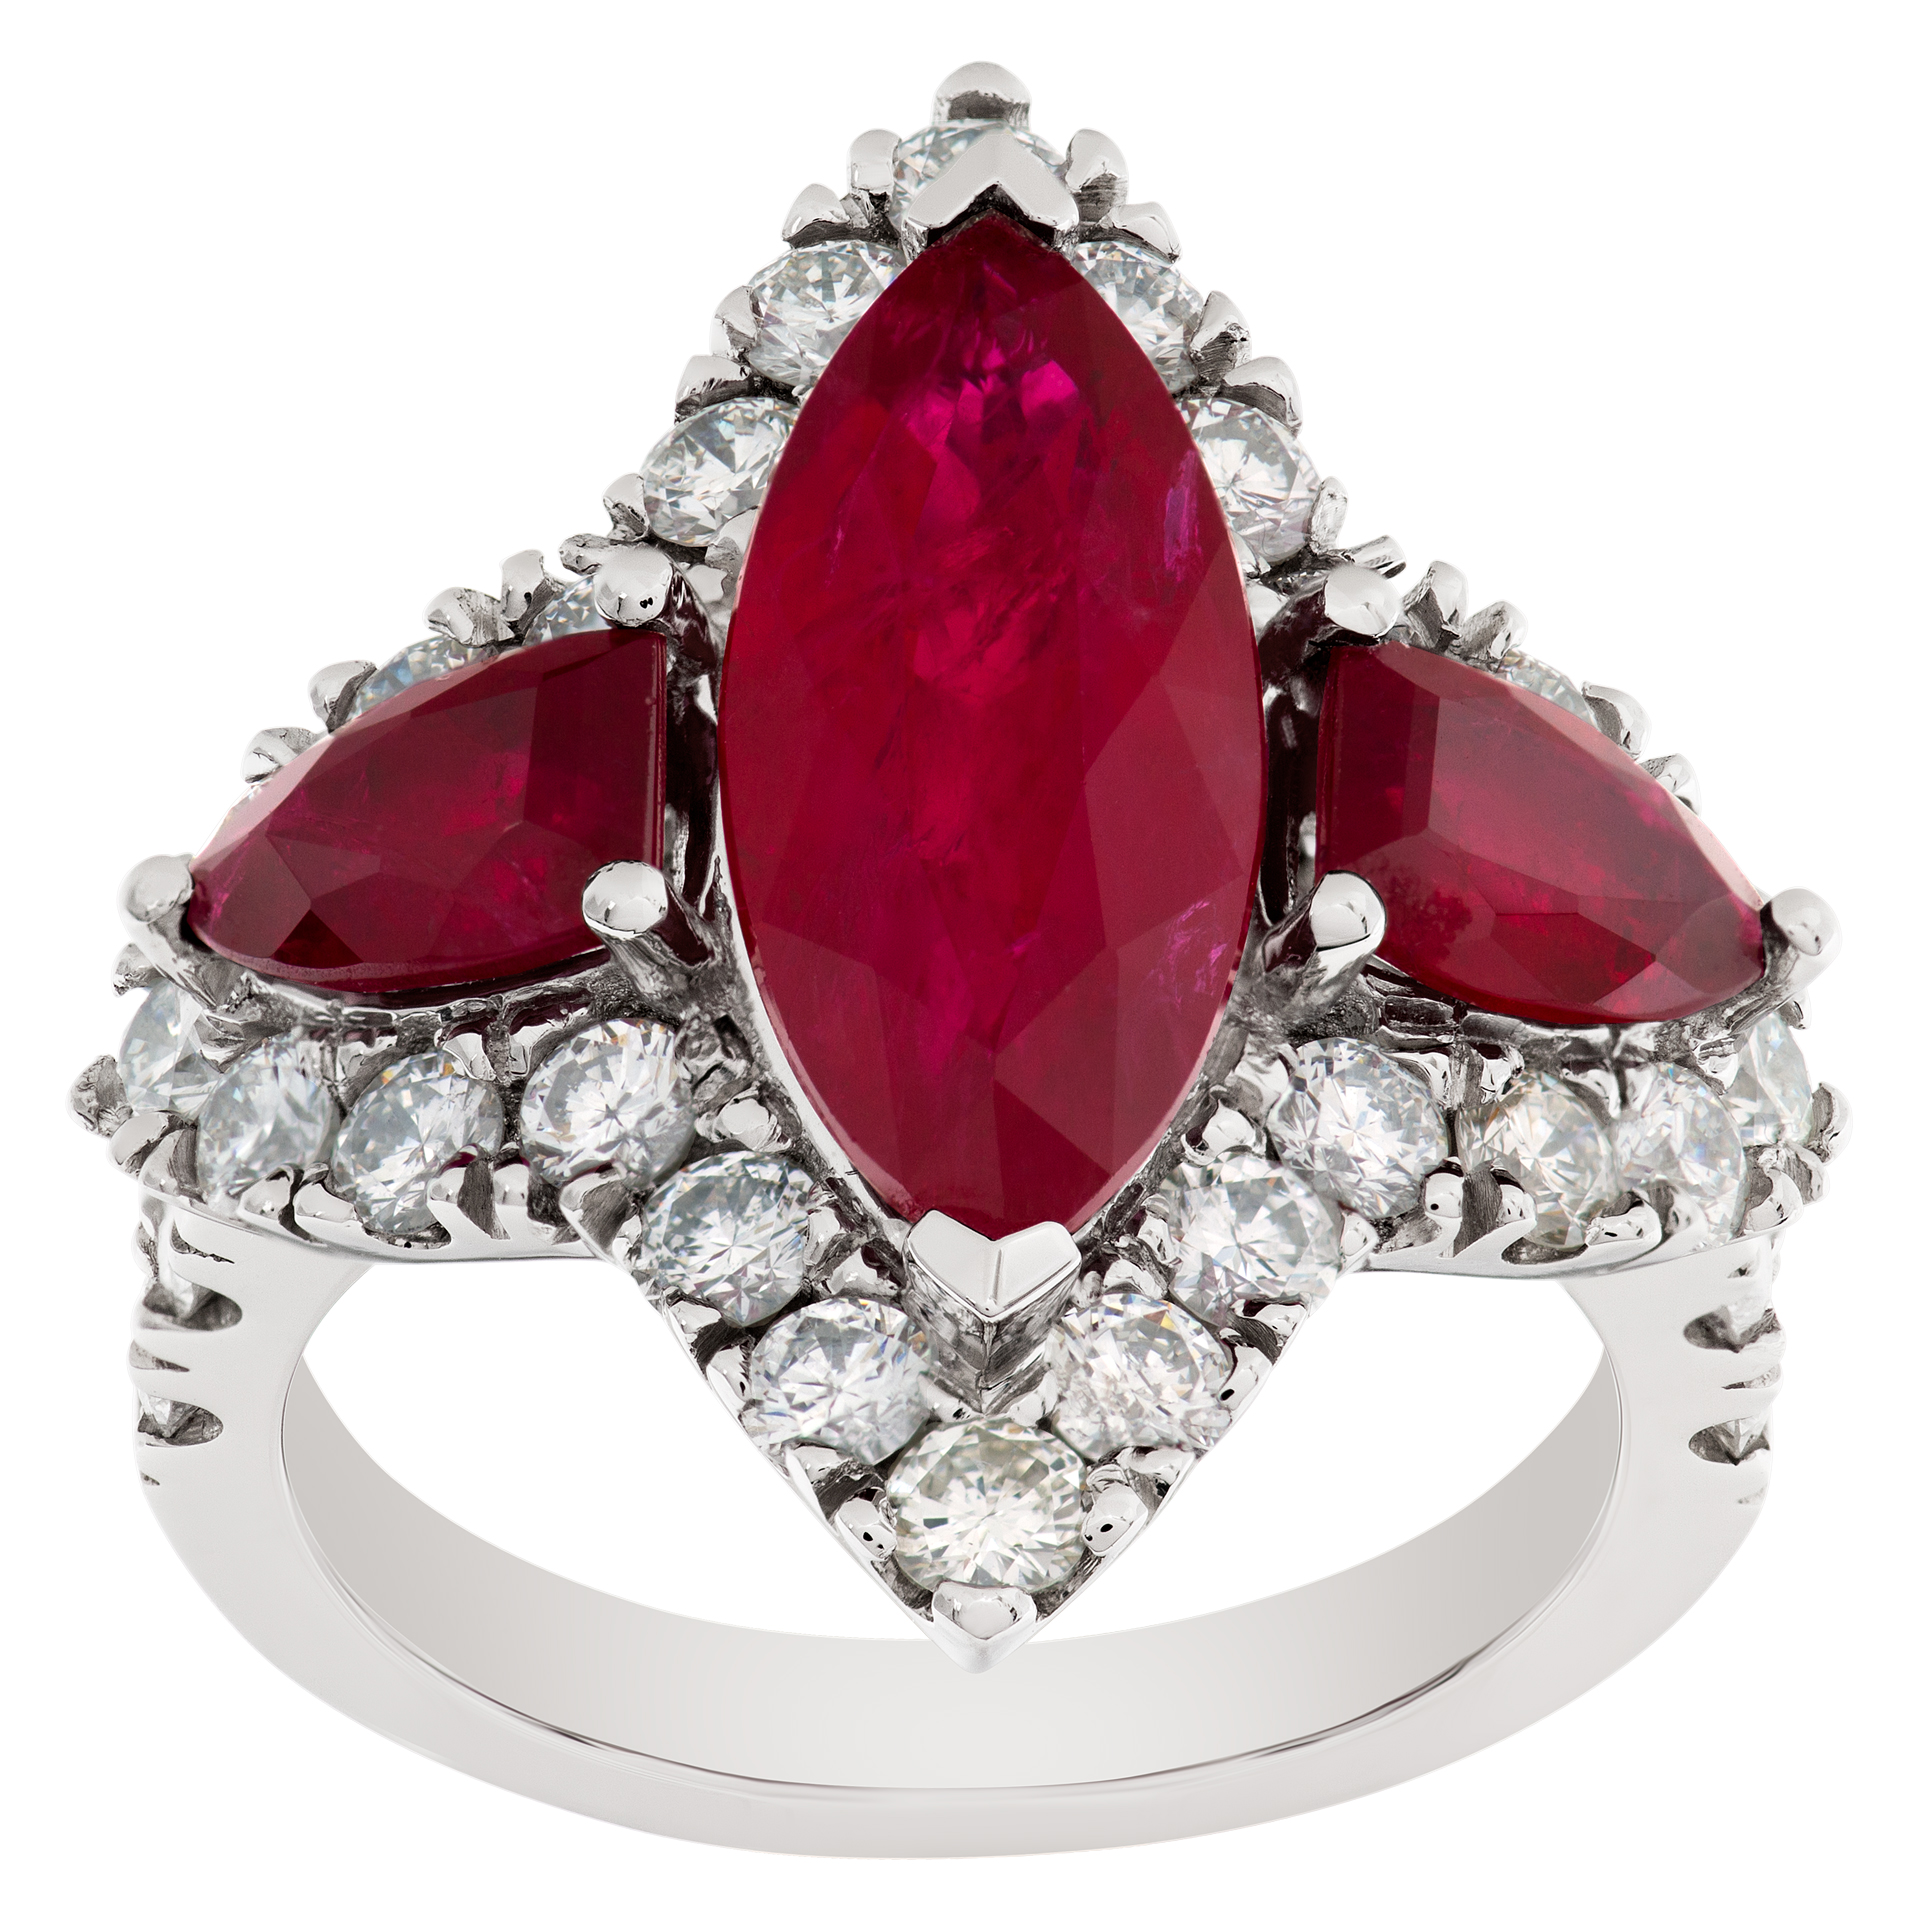 Gorgeous platinum ring with GIA certified 3.51 carat center step cut marquise brilliant Ruby,